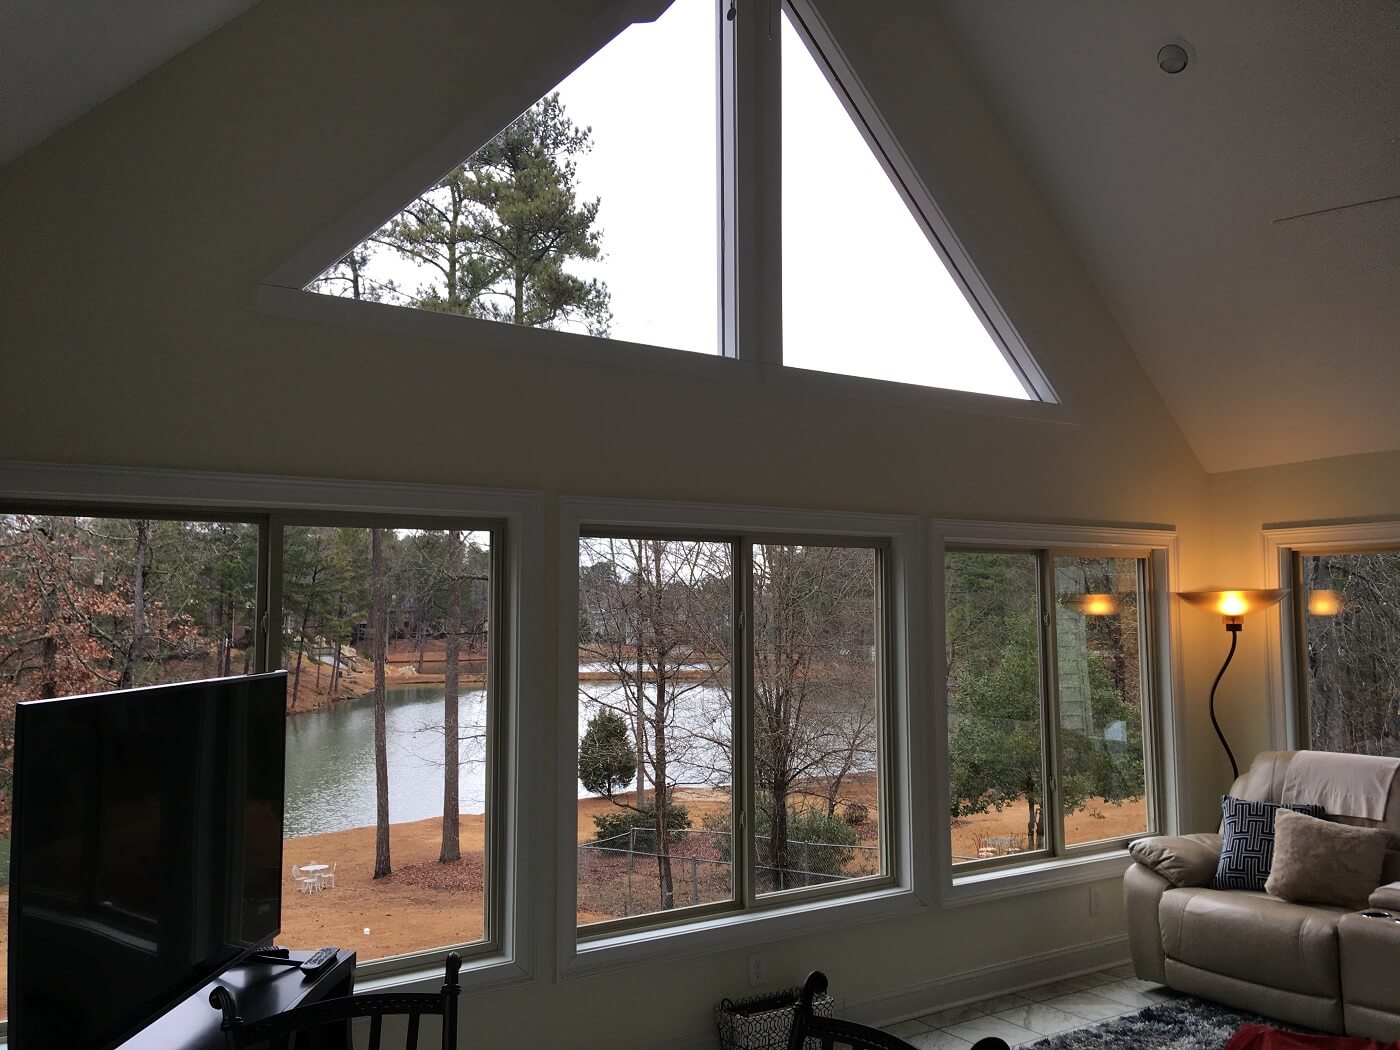 Interior of sunroom with private pond view